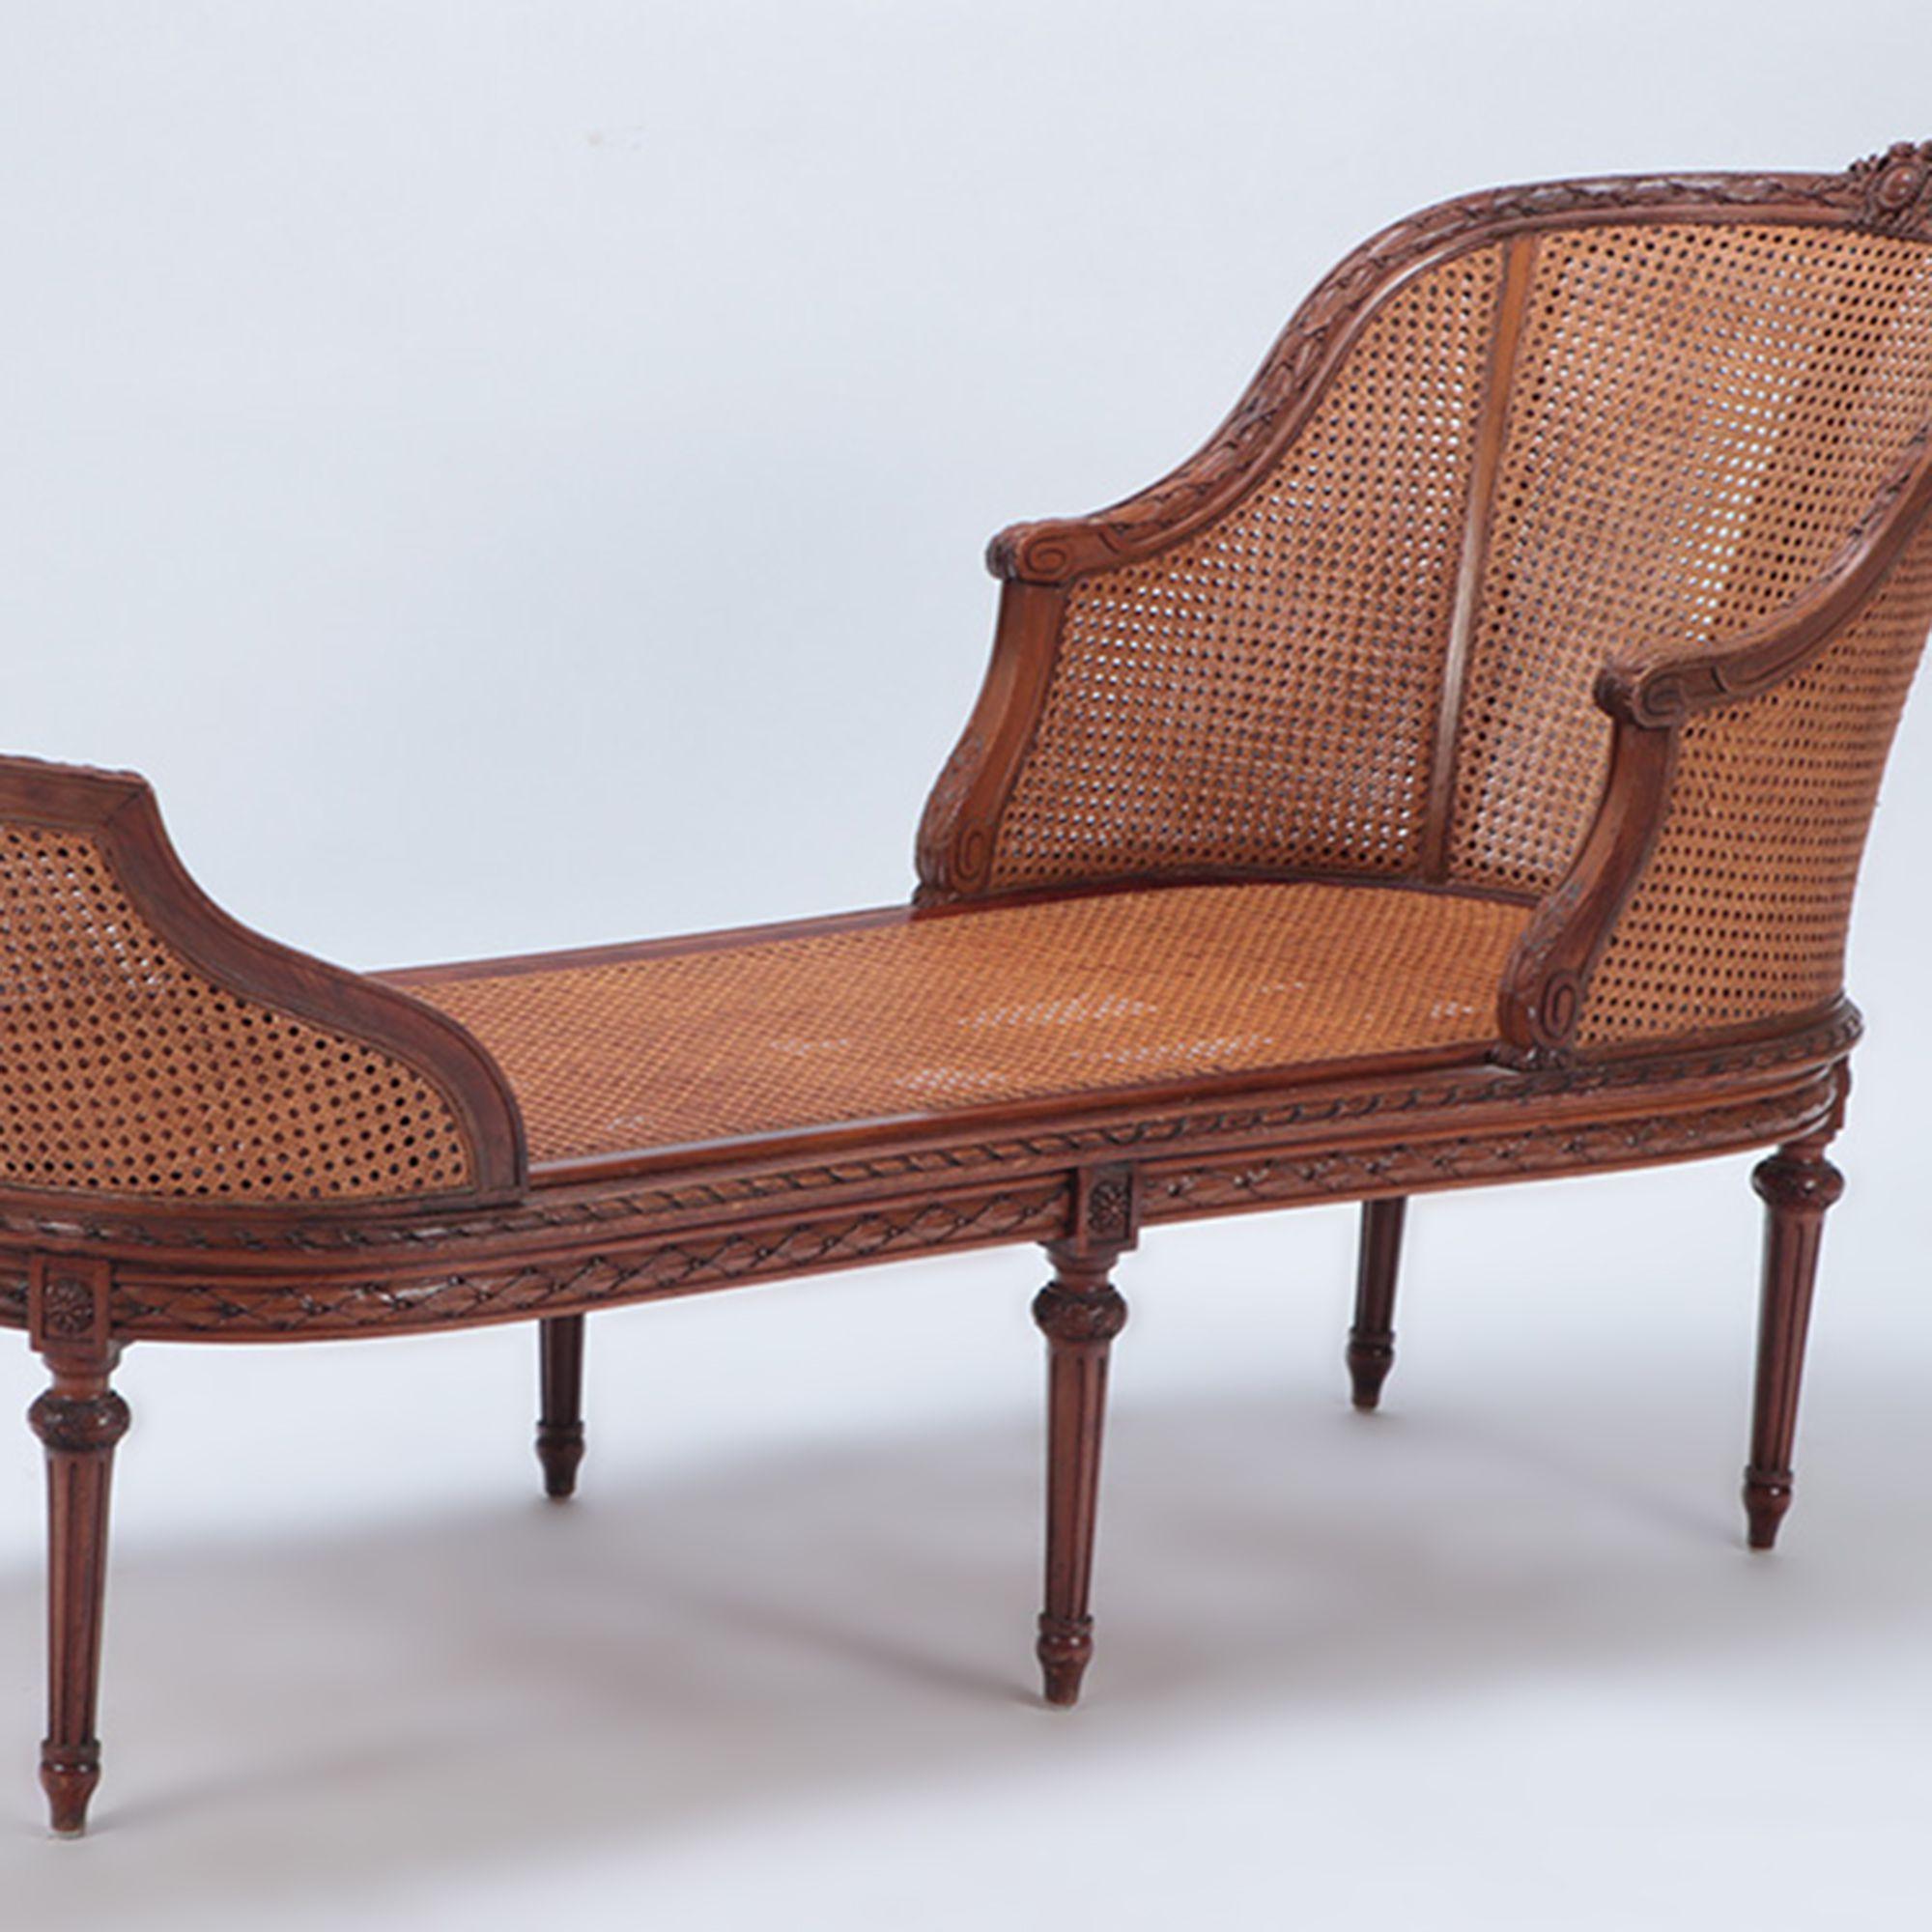 A French carved walnut chaise lounge in the Louis XVI style having double cane and loose cushion upholstery and resting on six fluted and round tapered legs.Rosettes along the bottom rail at each knee, circa 1900.